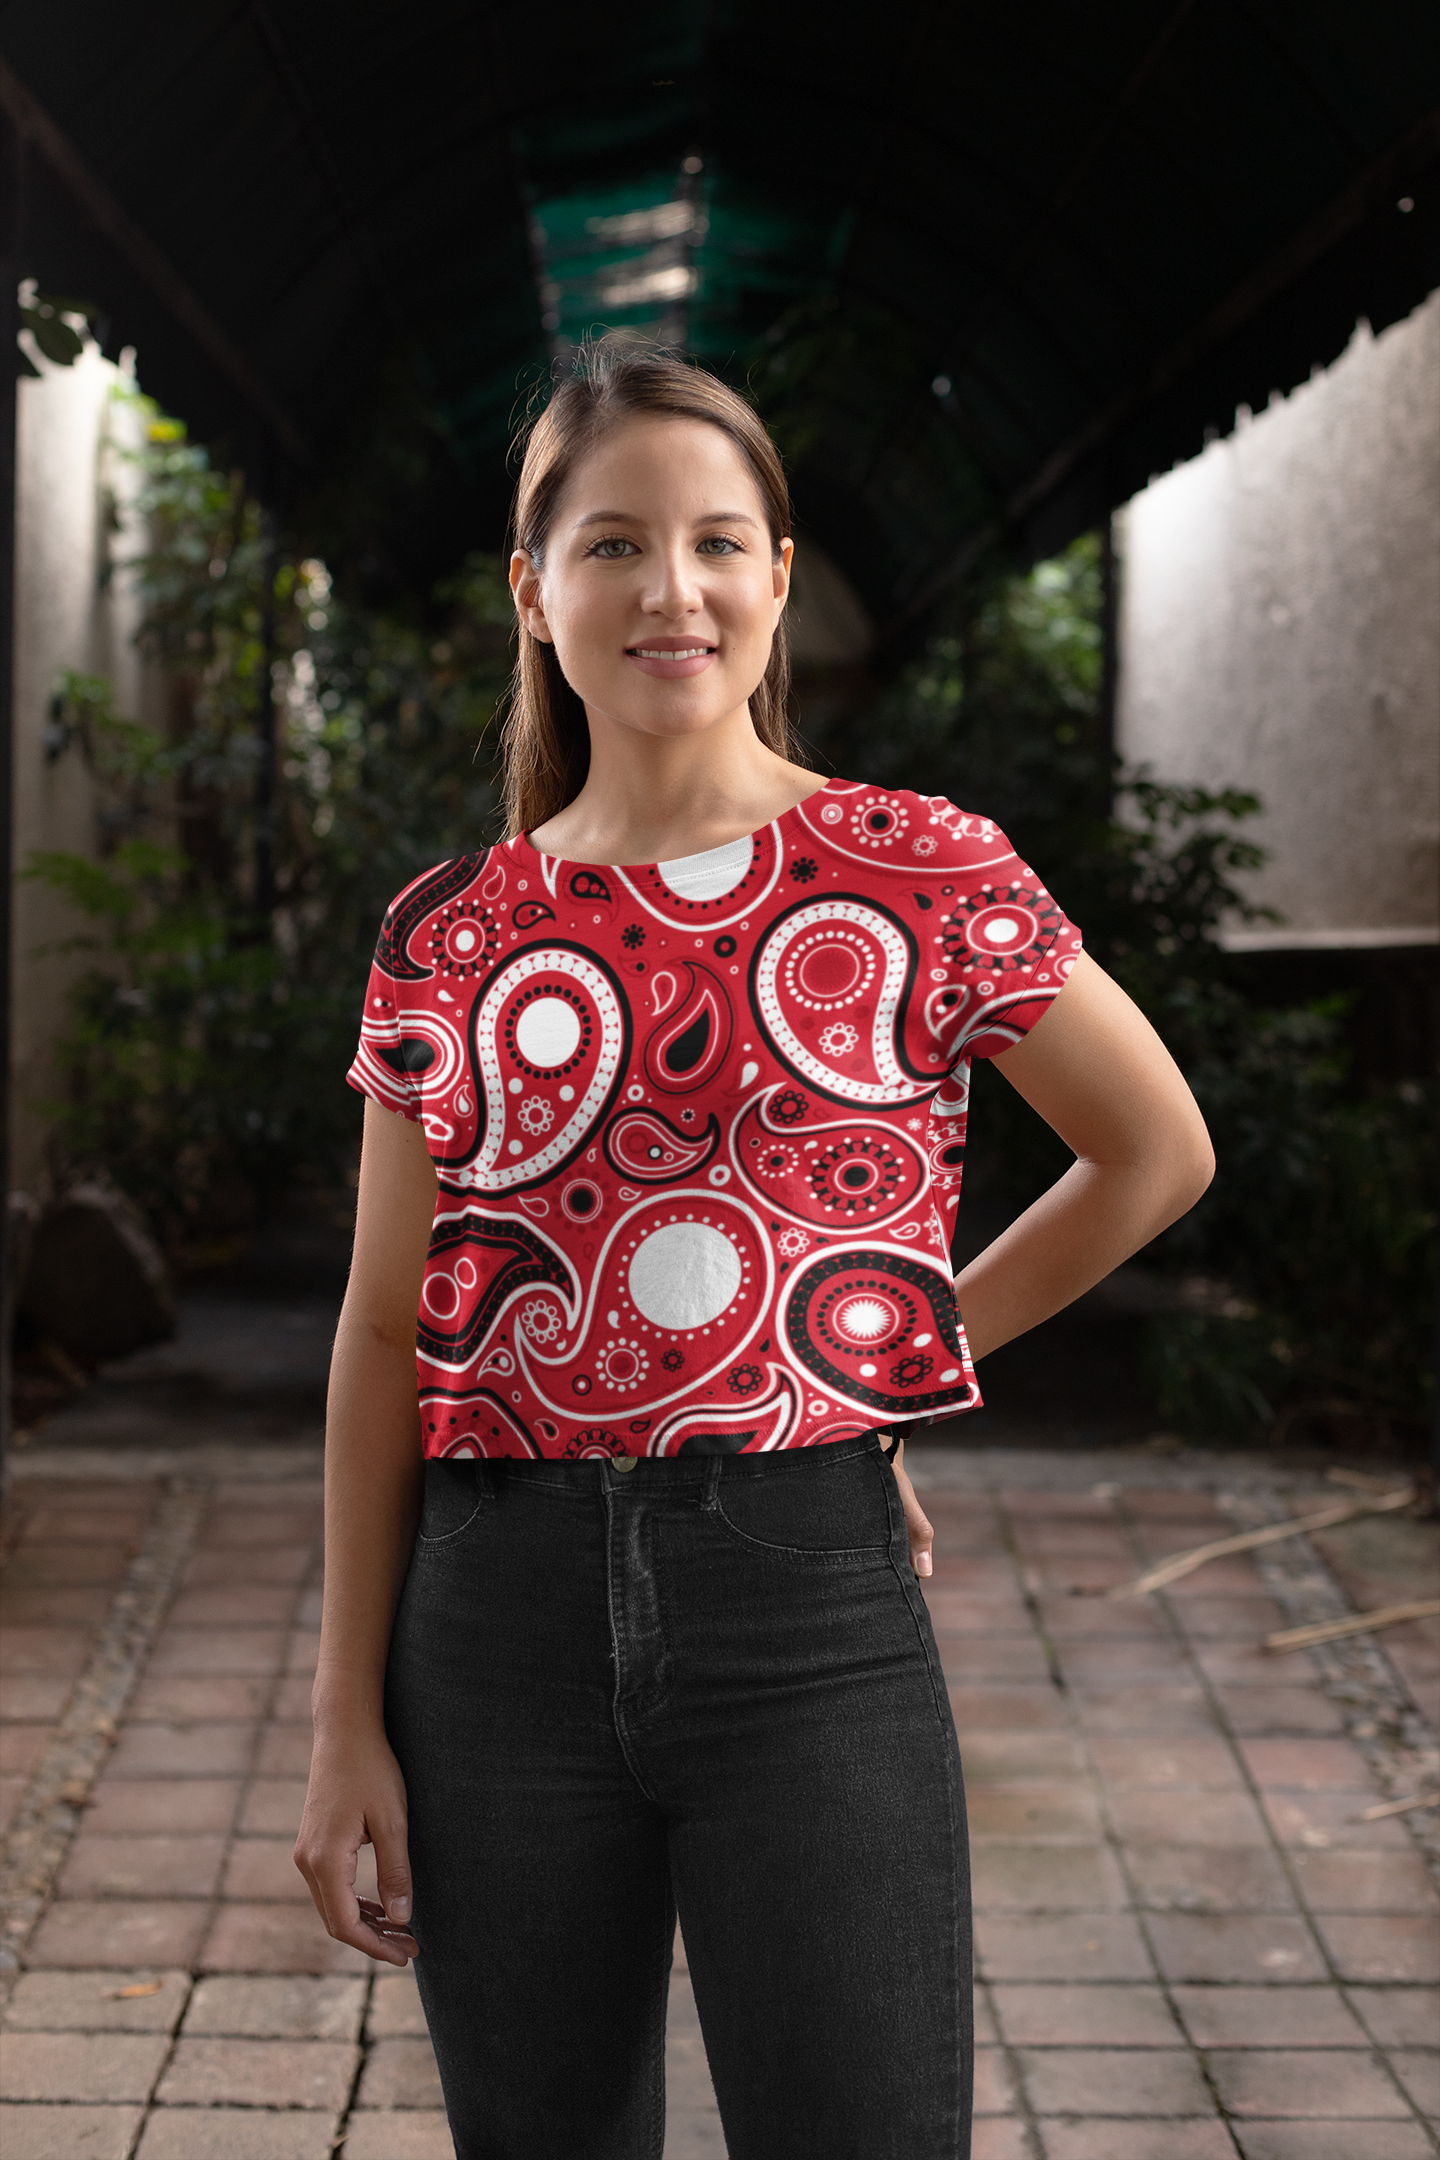 Paisley Print Red Crop Top For Women